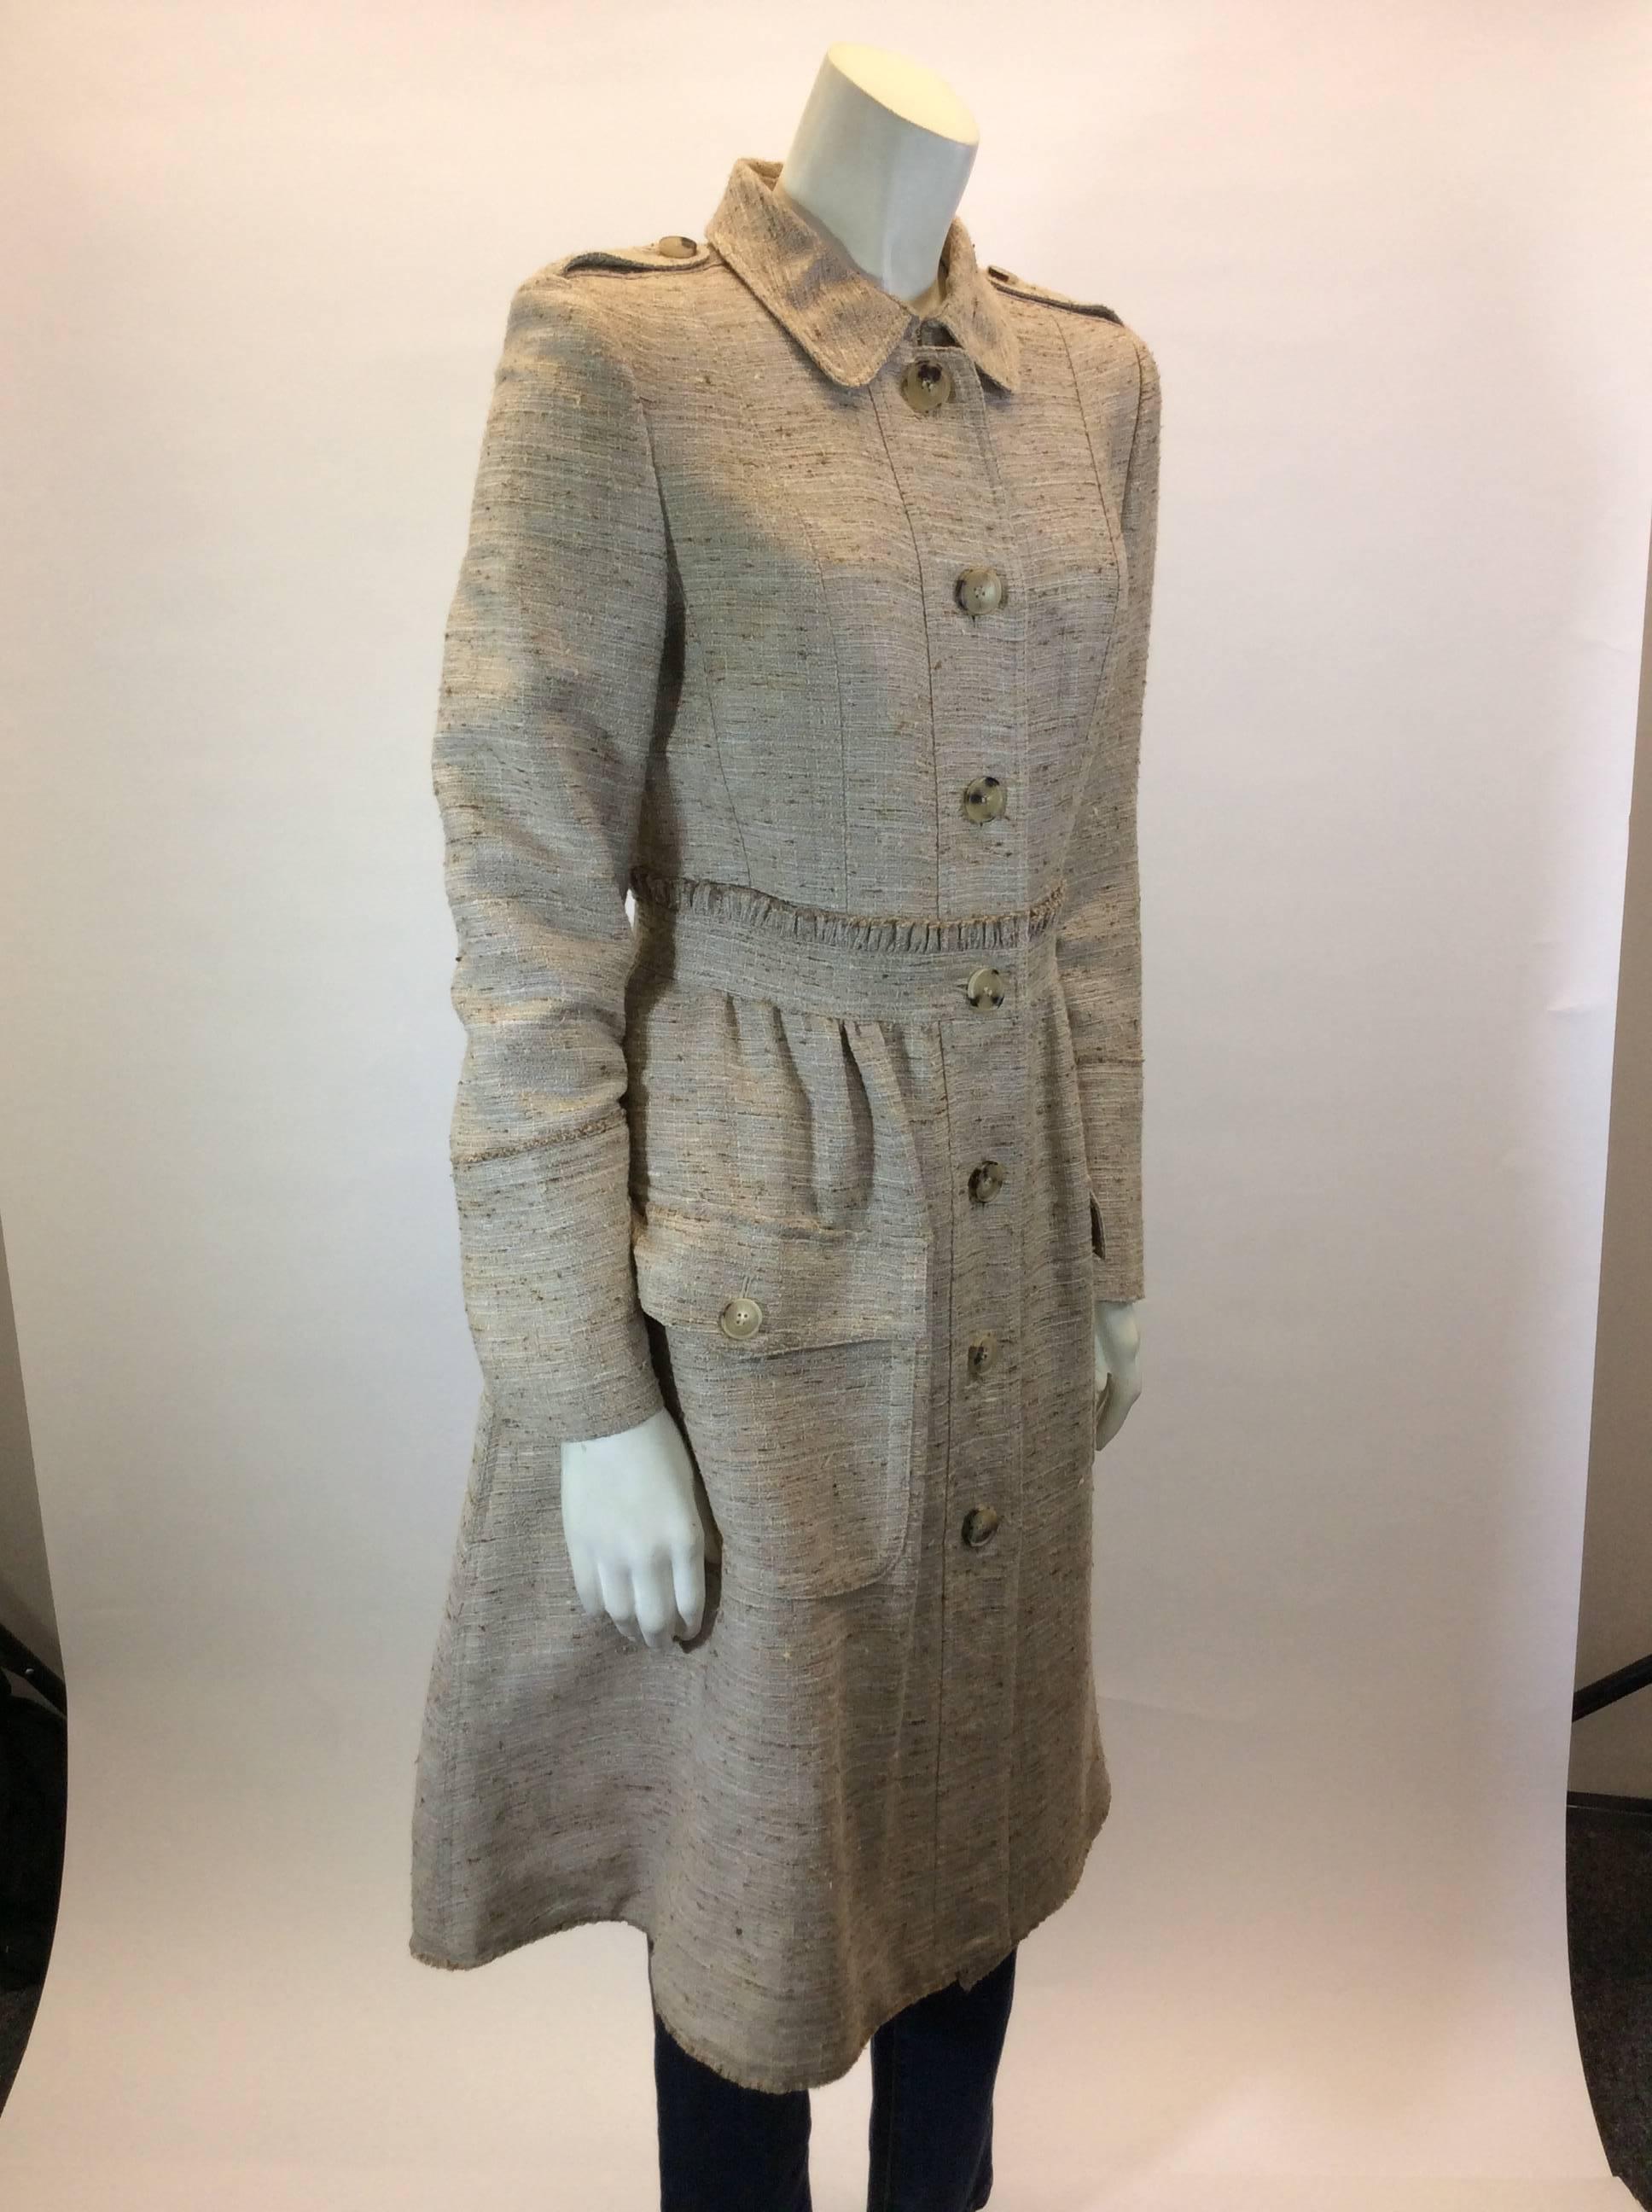 Burberry London Coat
-Size US 4
-Linen & Wool with 100% silk lining
-Comes with leather belt 
-Ruffle waist line 
-2 front pockets